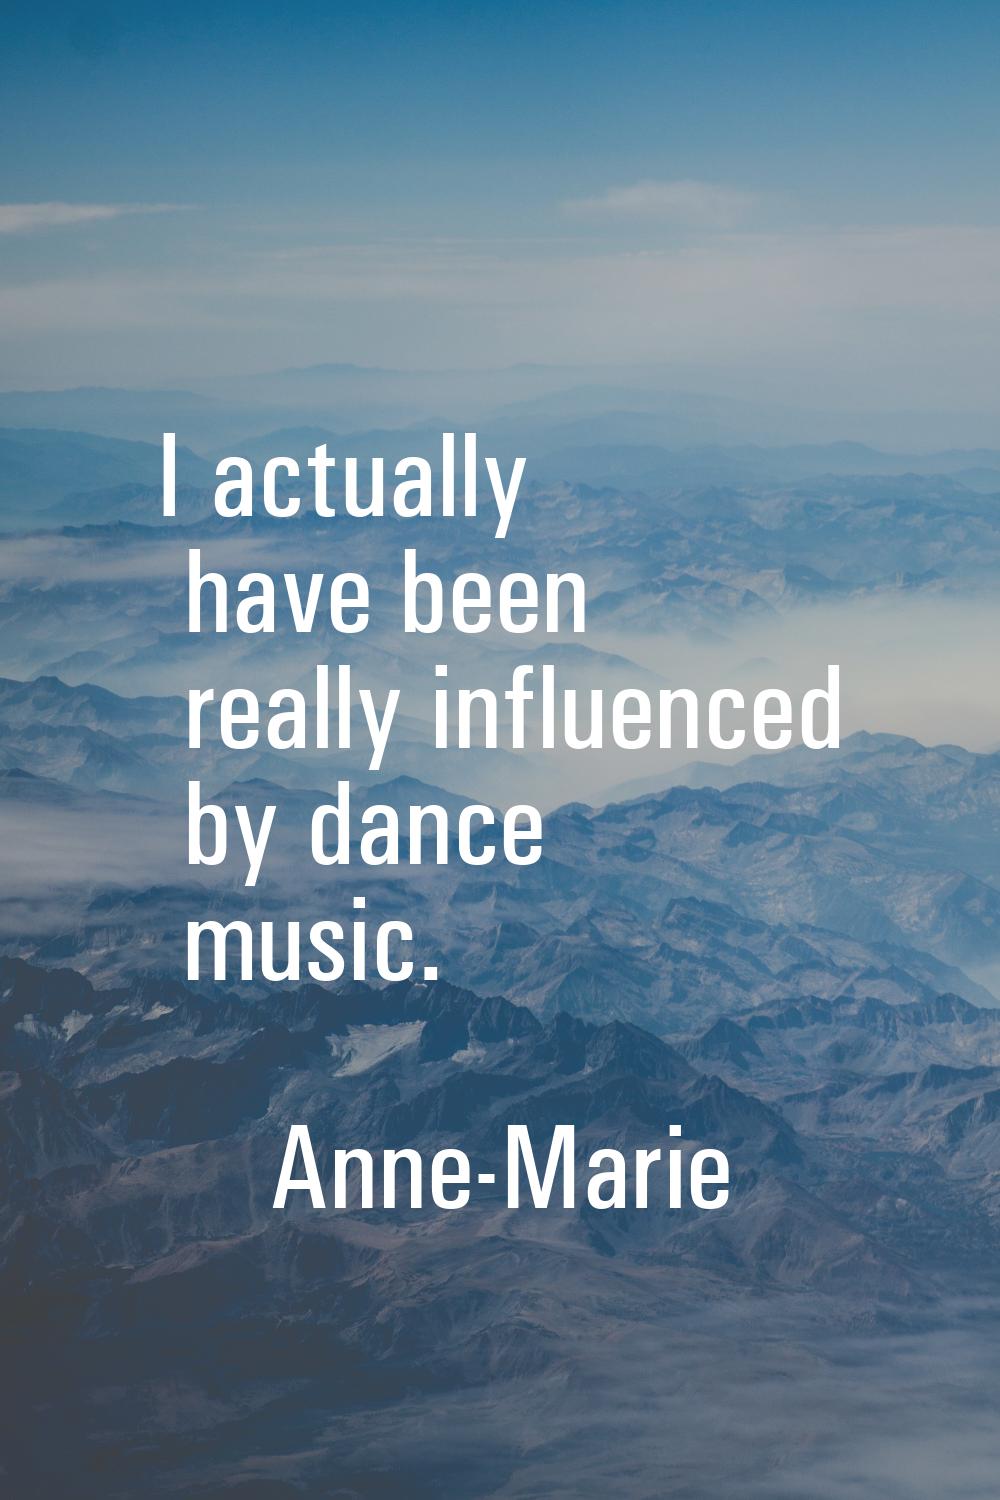 I actually have been really influenced by dance music.